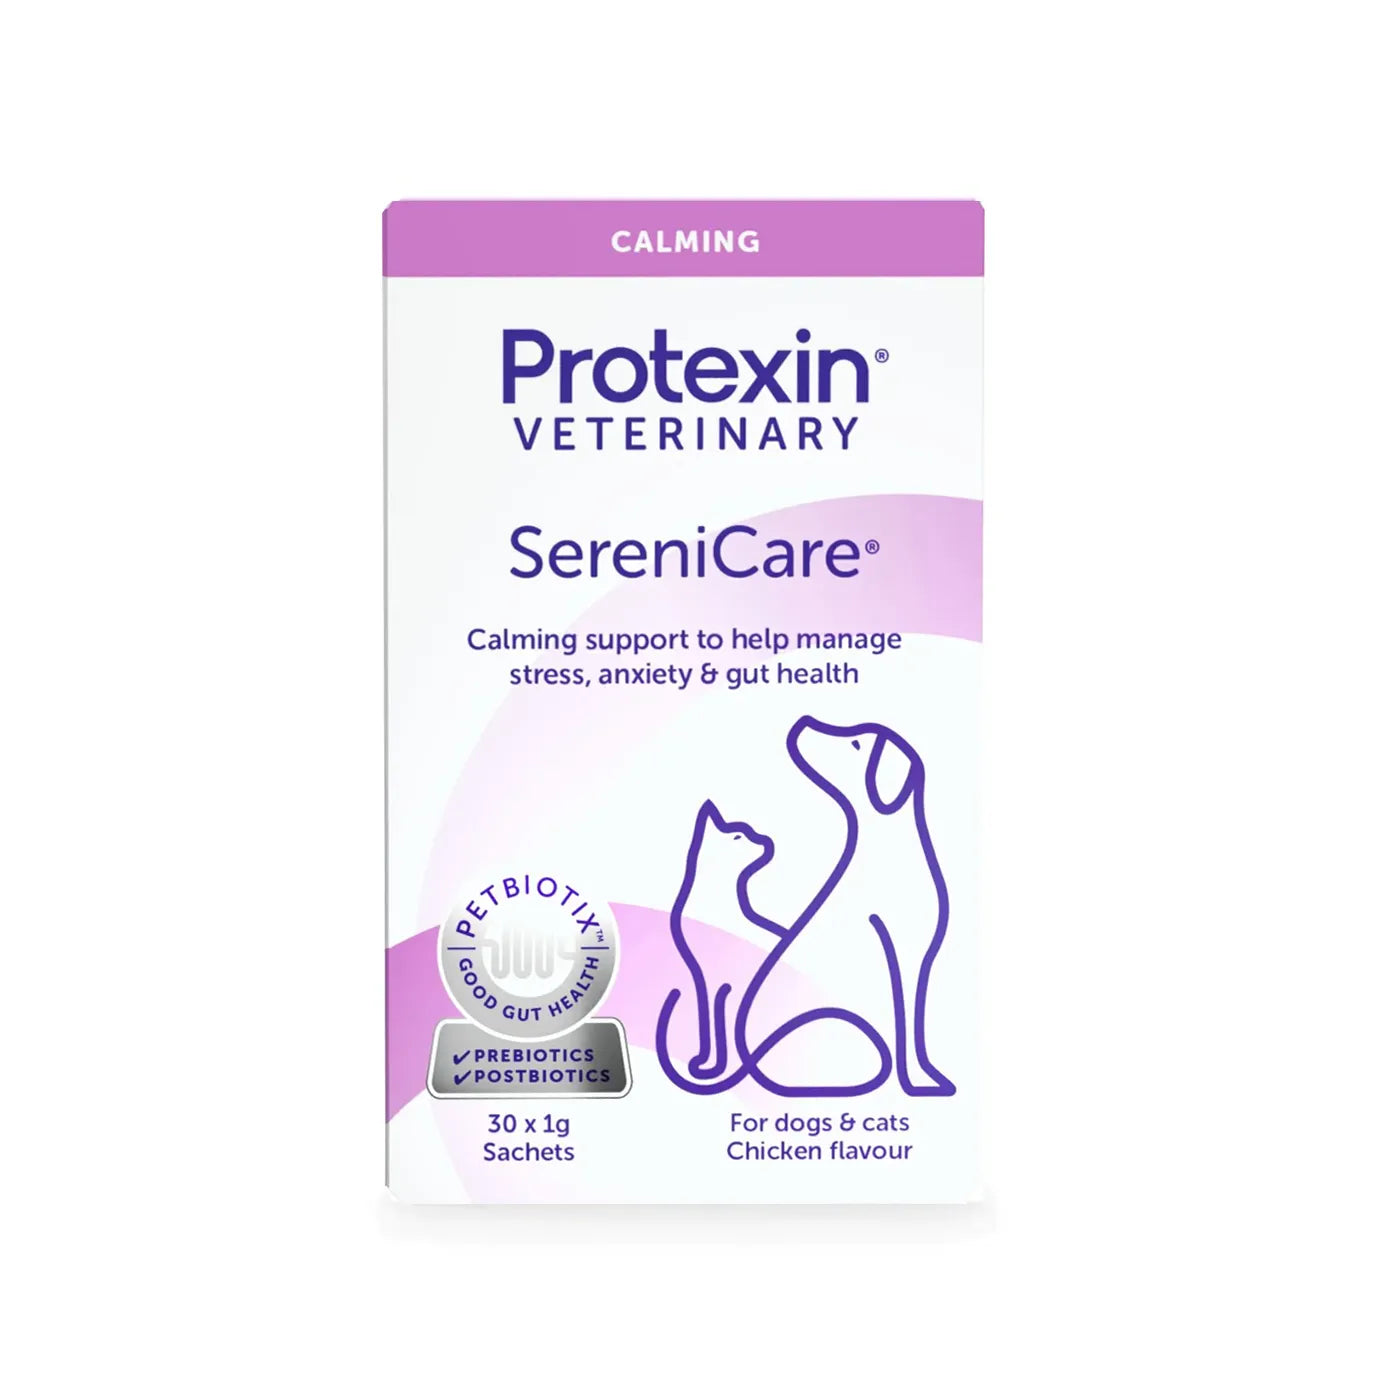 Protexin - SereniCare (Calming Supplements for Dogs & Cats) 30 Sachets